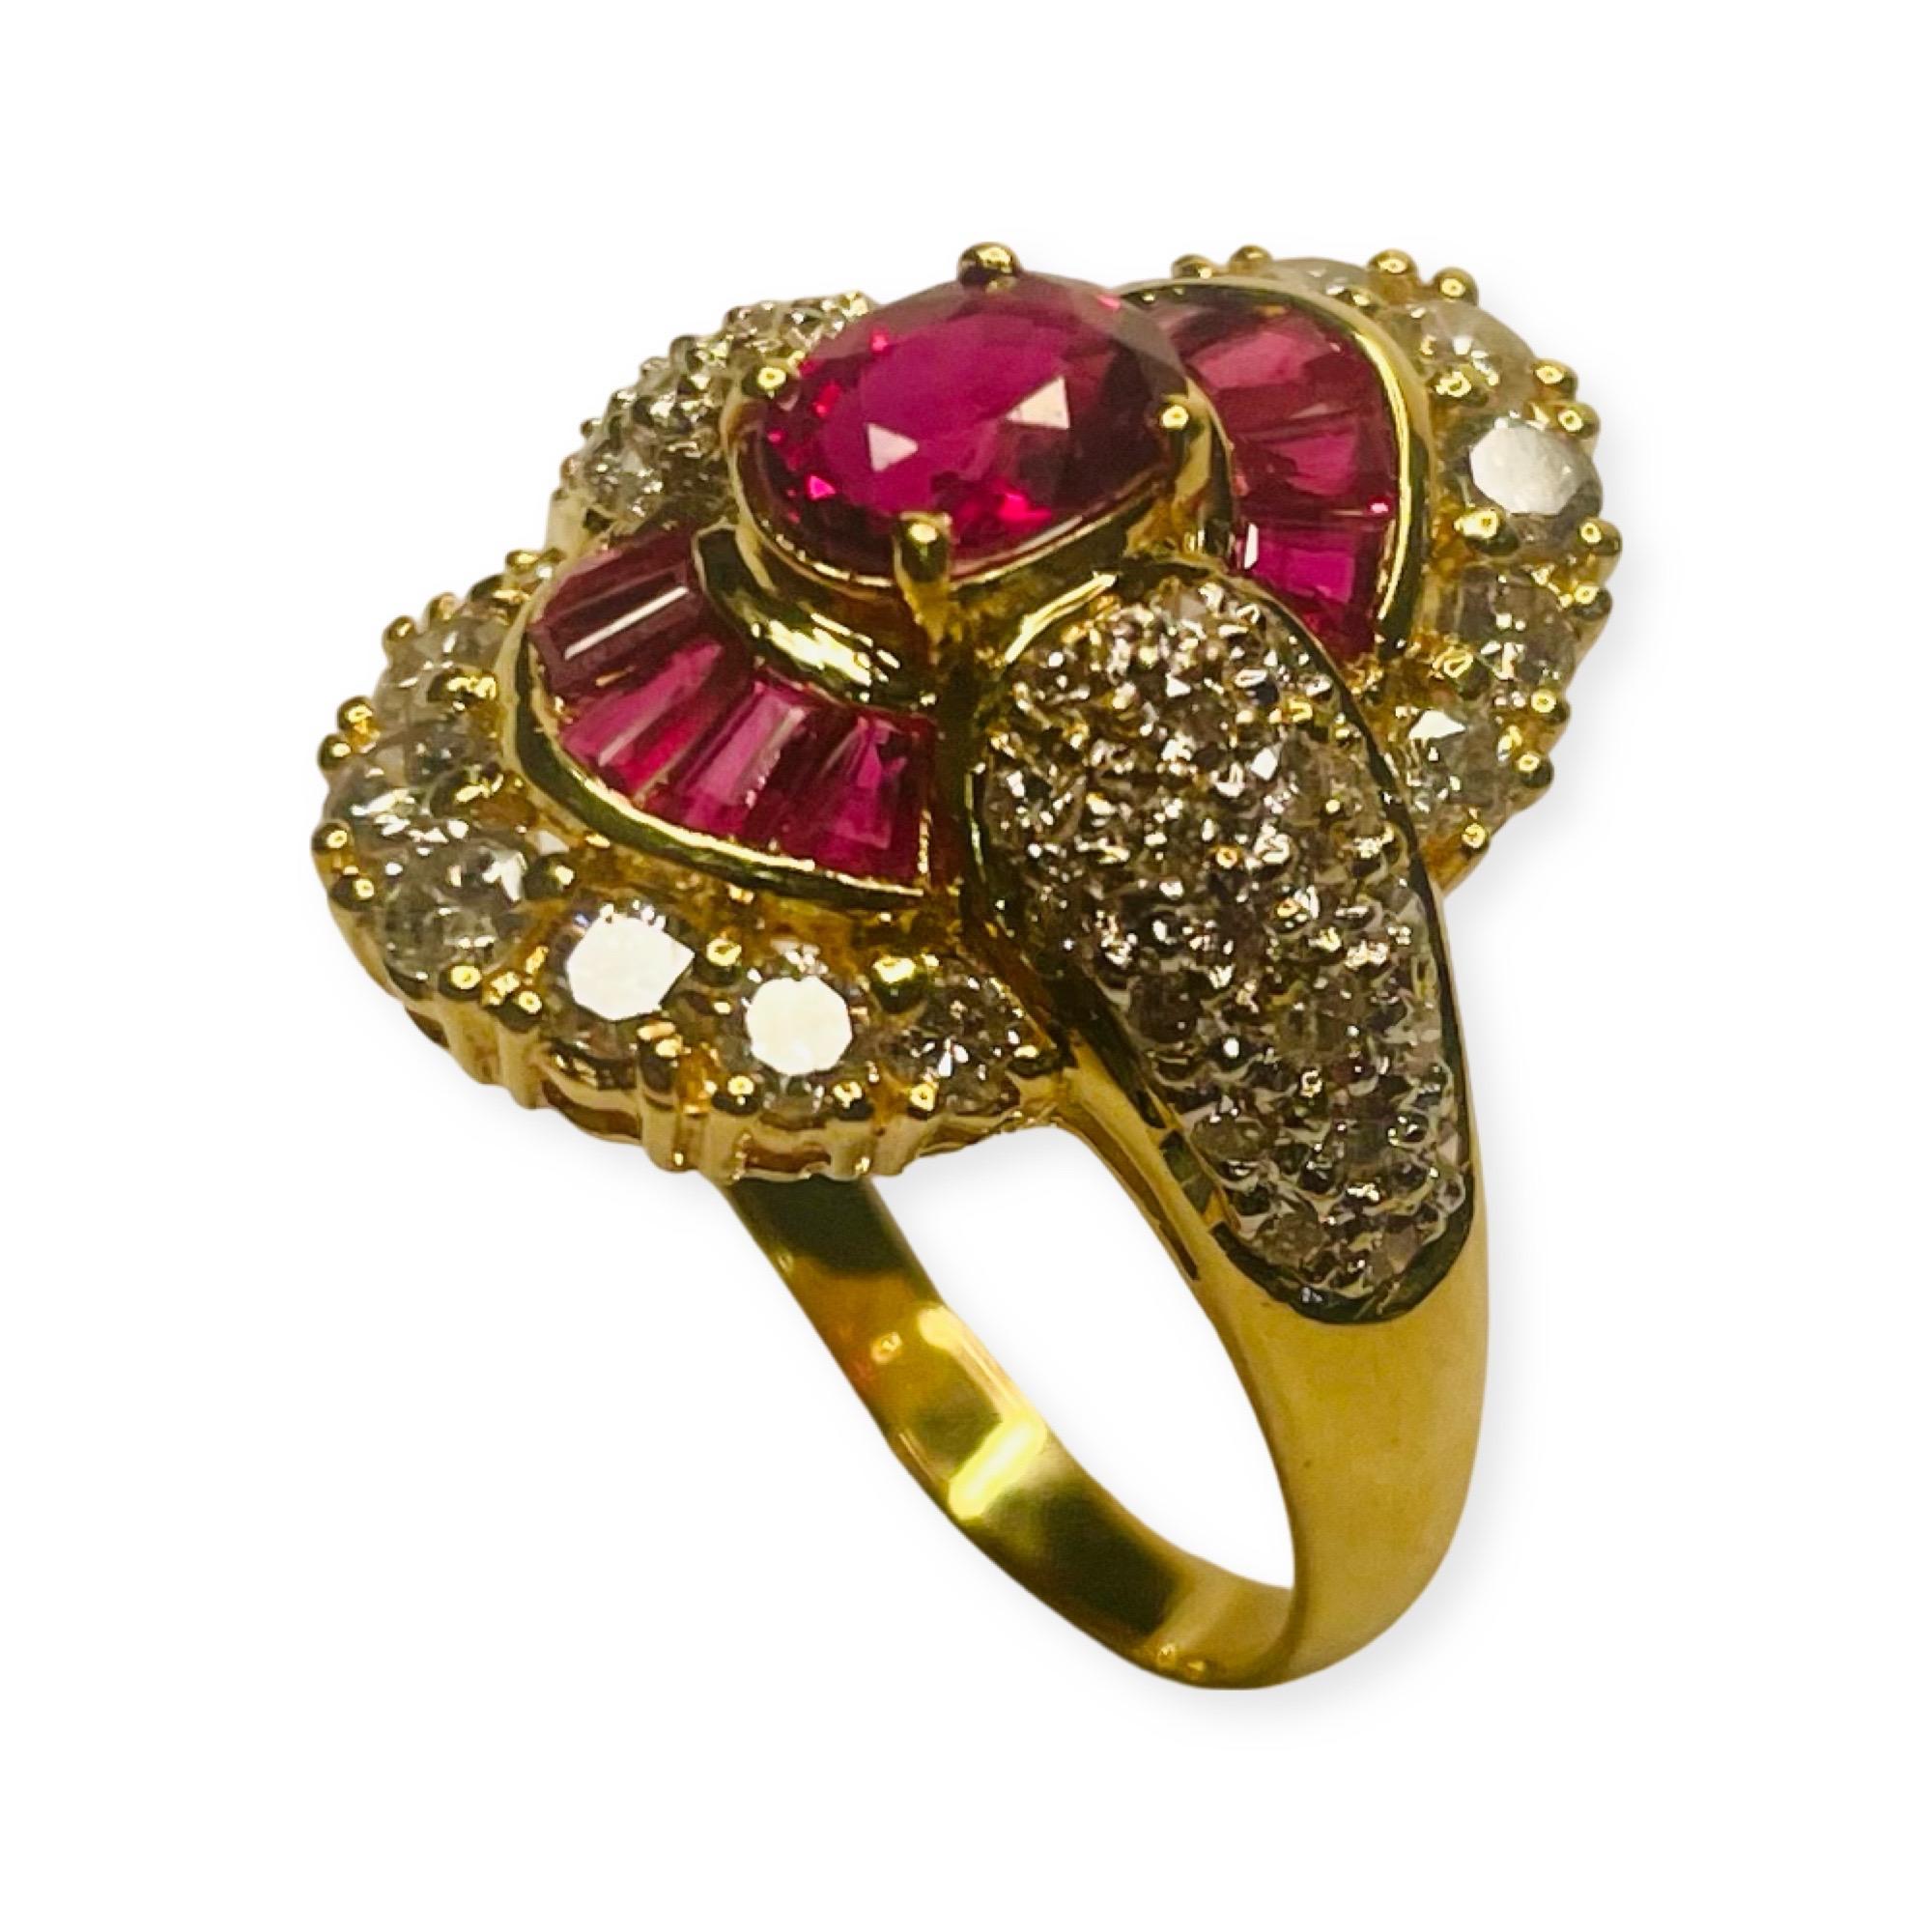 Lithos 18K Yellow Gold Ruby and Diamond Ring. There is a 1.01 carat, natural ruby, prong set in the center of the ring. The ruby measures 6.39 mm X 4.76 mm X 3.3 mm.  There are 10 baguette cut rubies, channel set above and below the center ruby. 